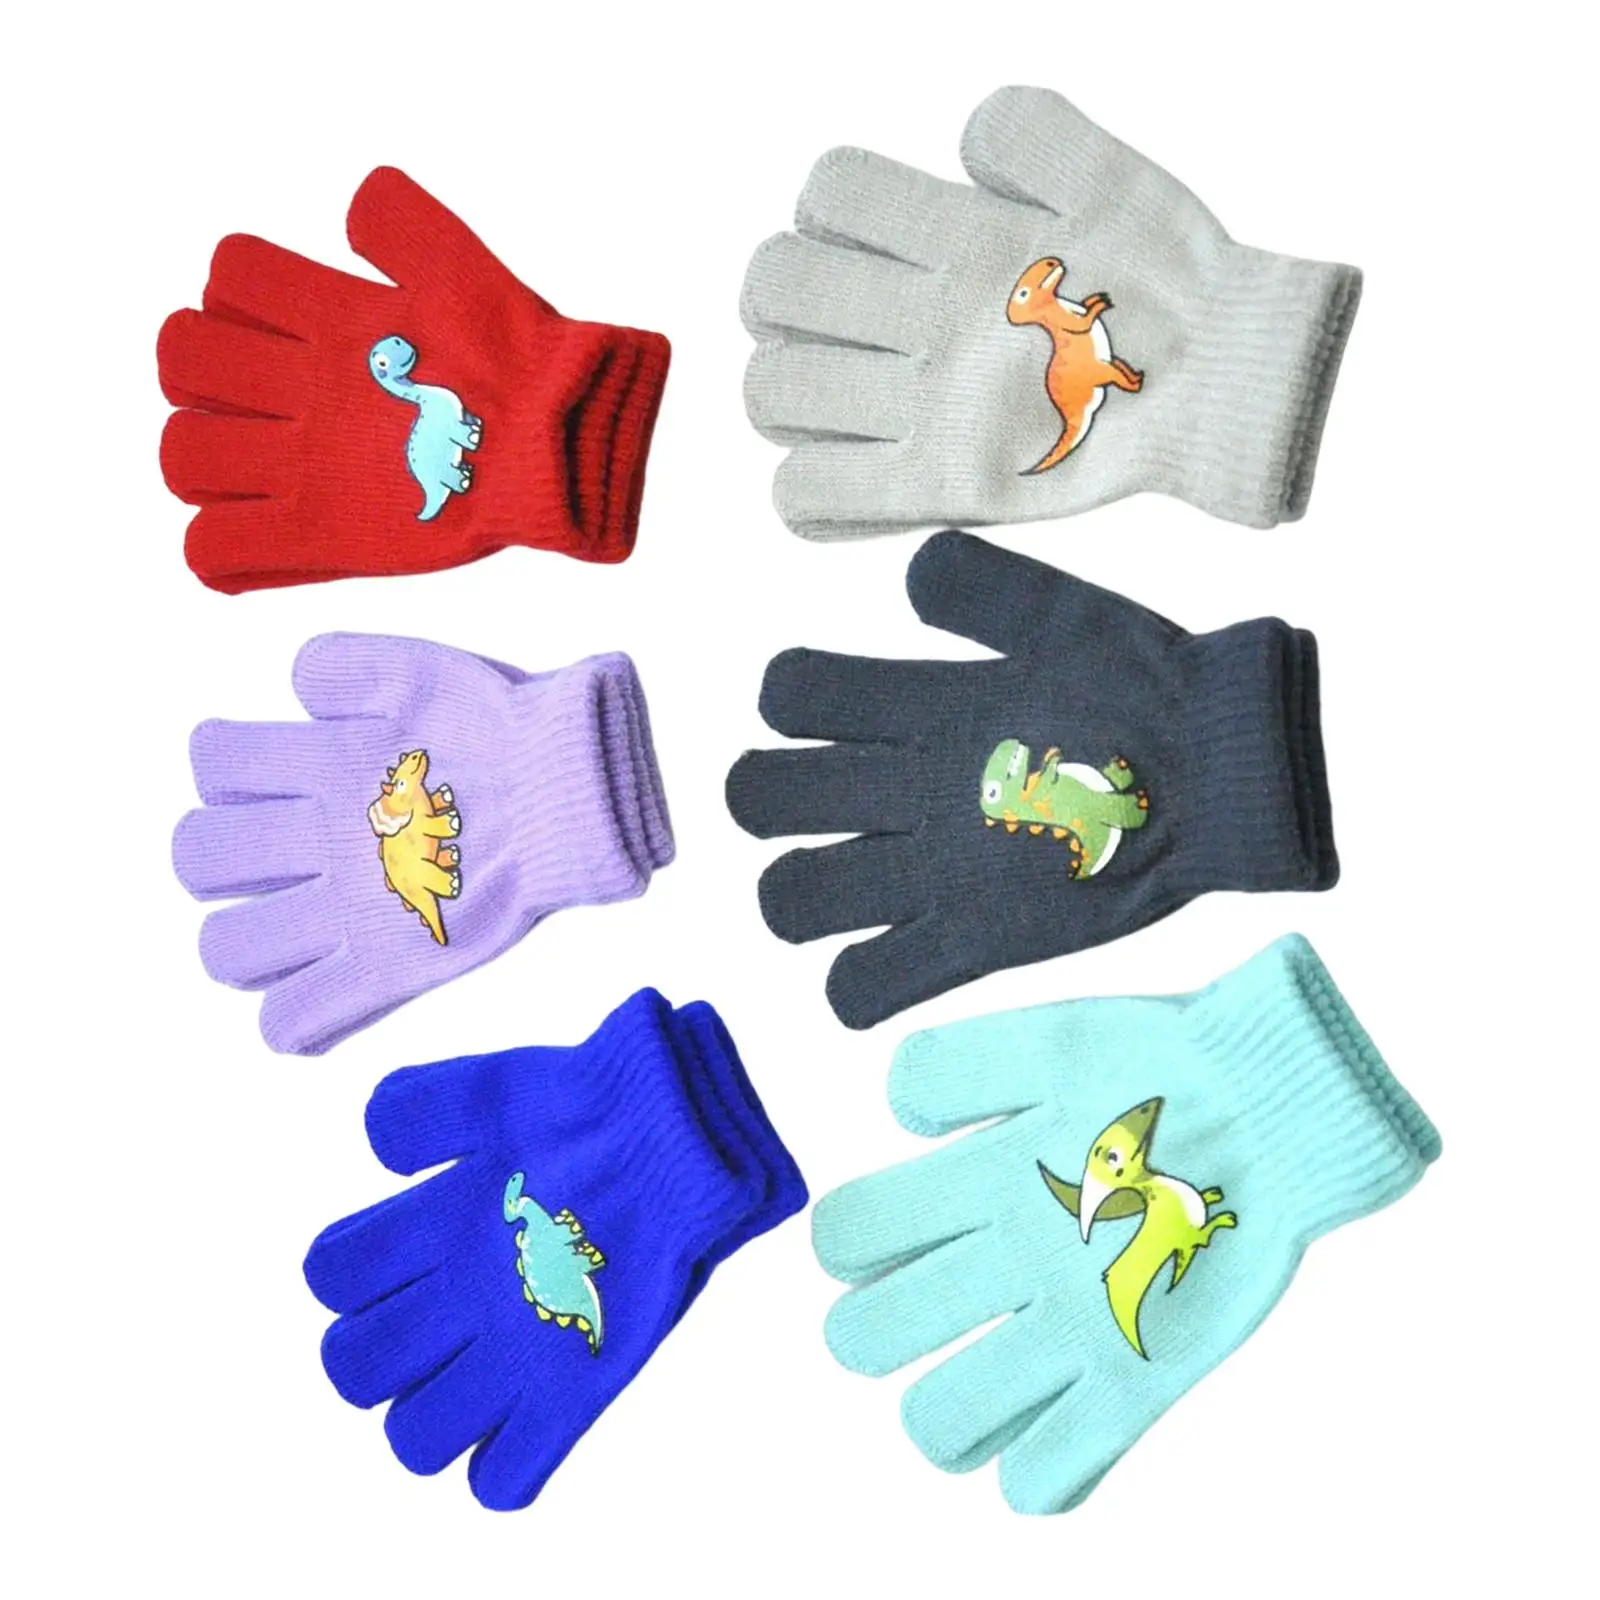 Kids Winter Gloves Hand Warmer Stretchy Full Finger Mittens Soft for Gift for Boy Girl Child Cold Weather Outdoor Sports